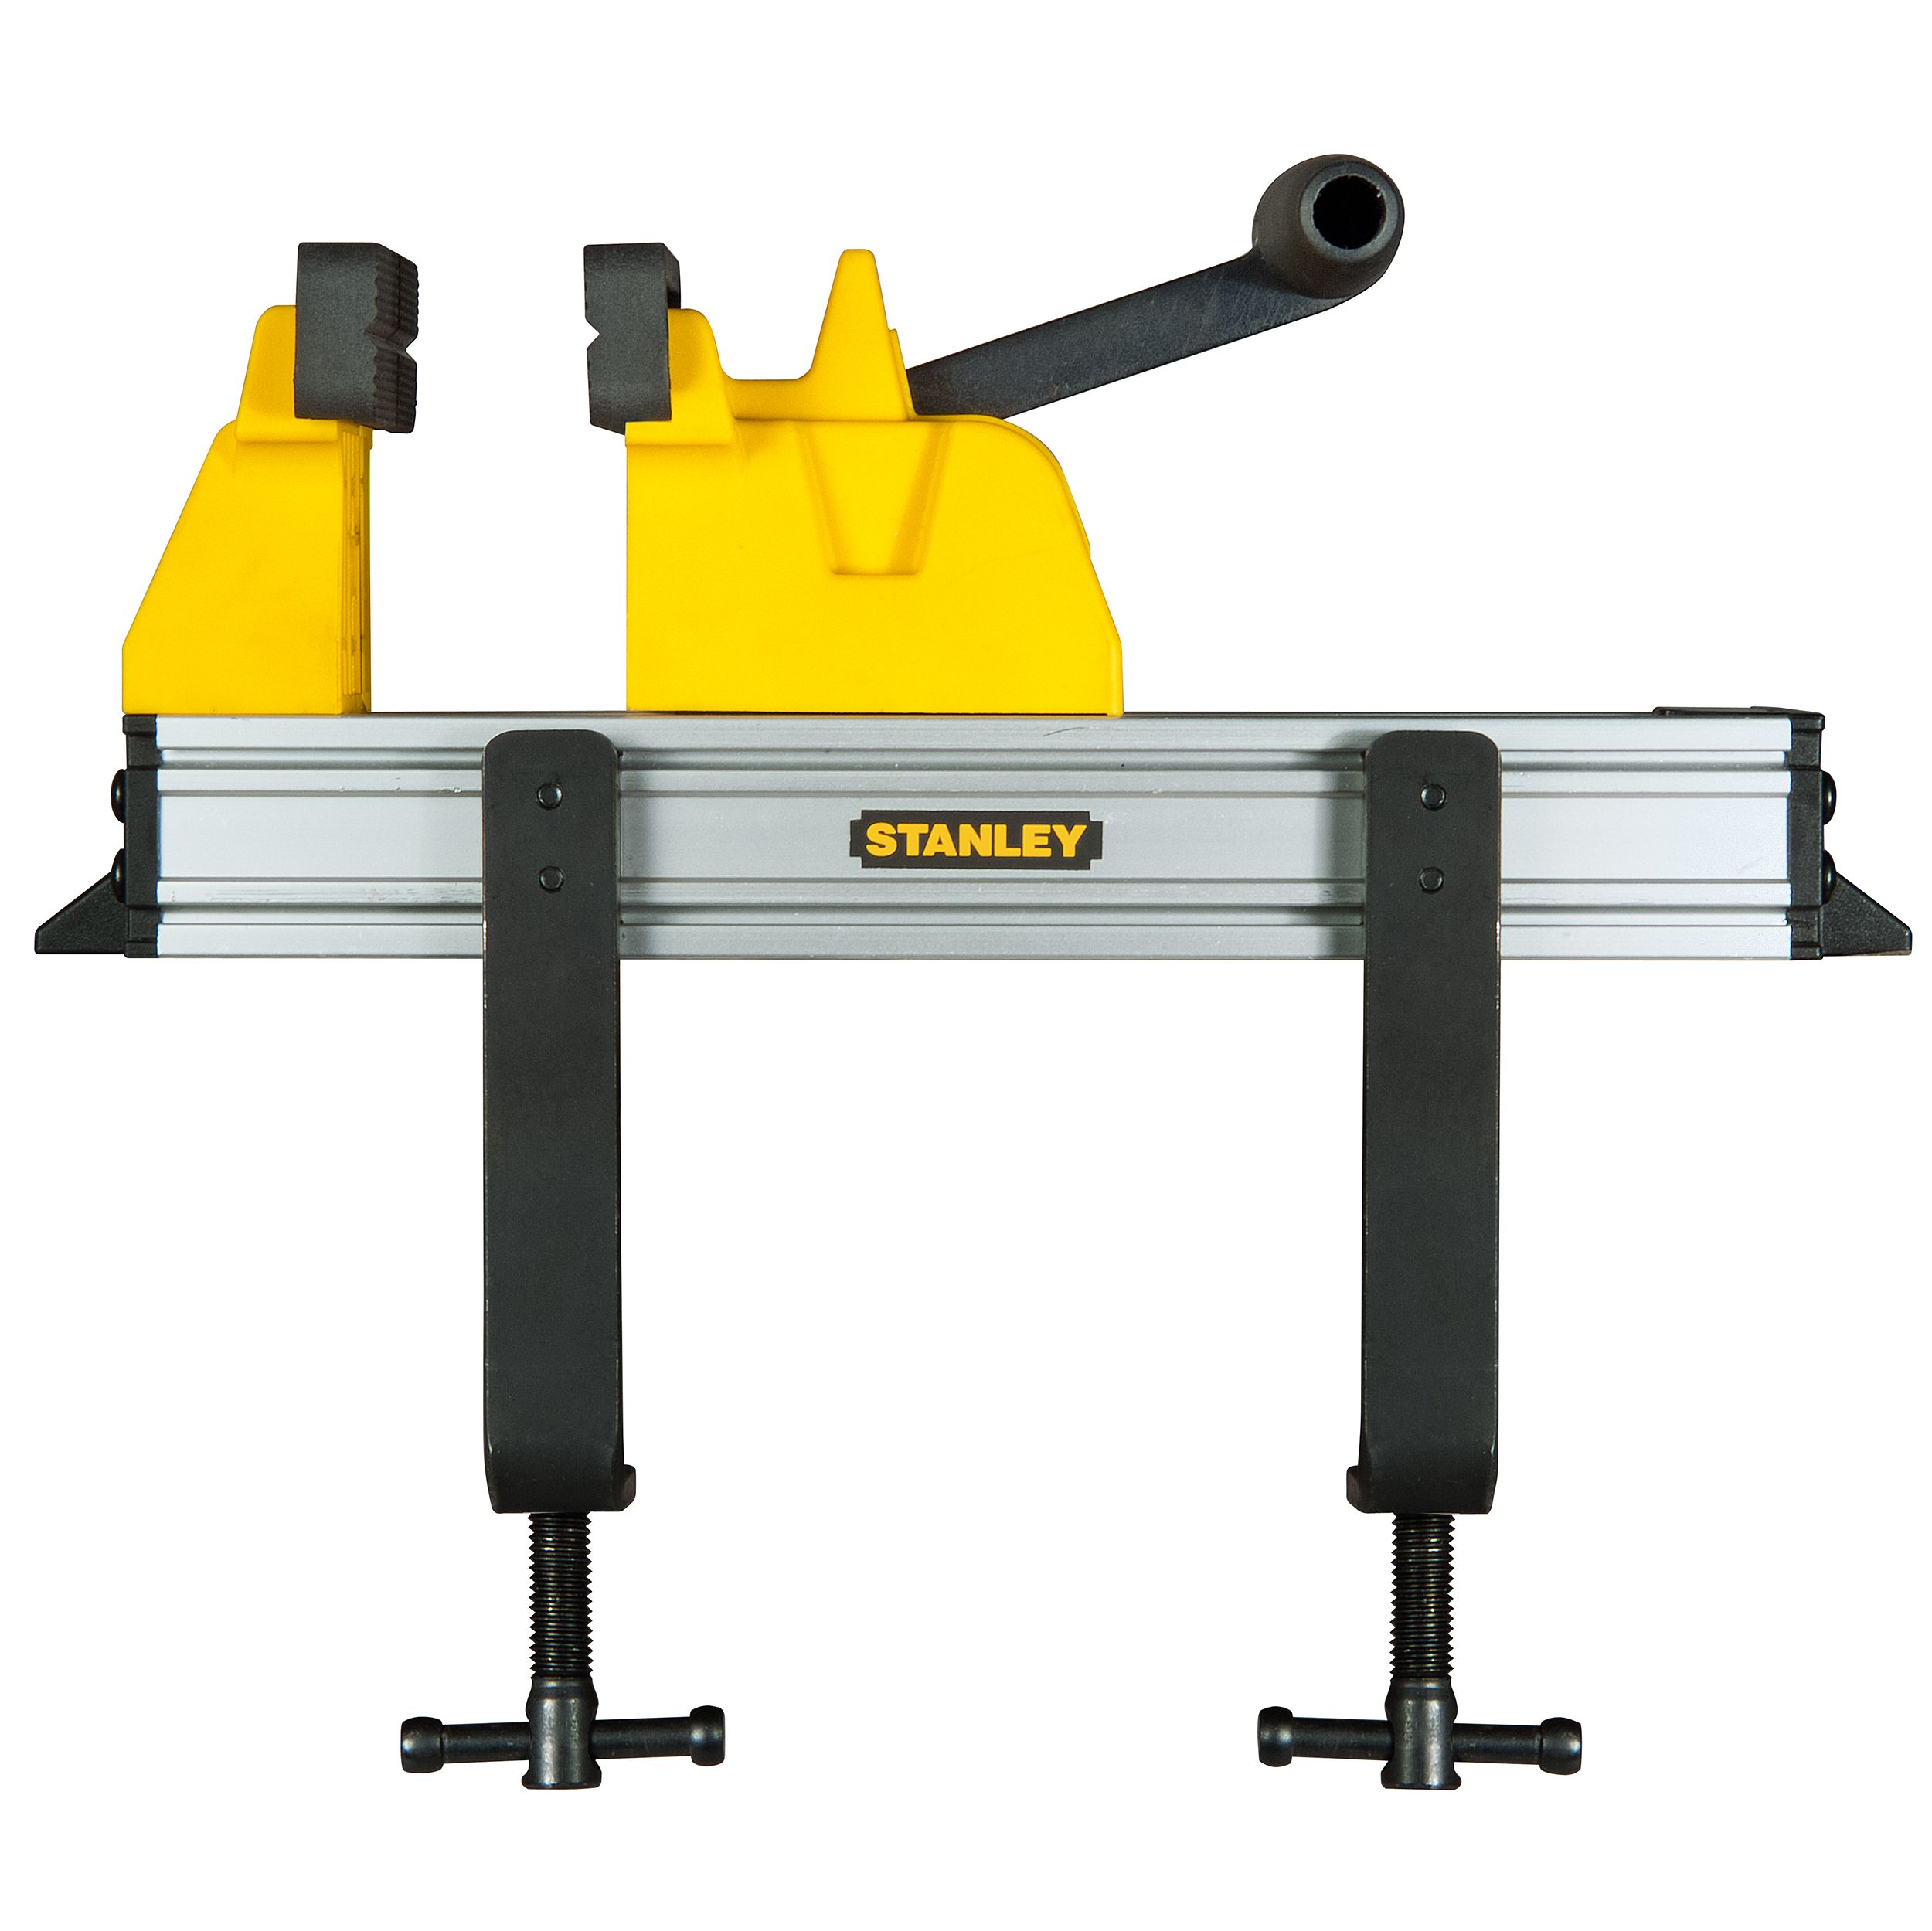 Stanley Portable vice